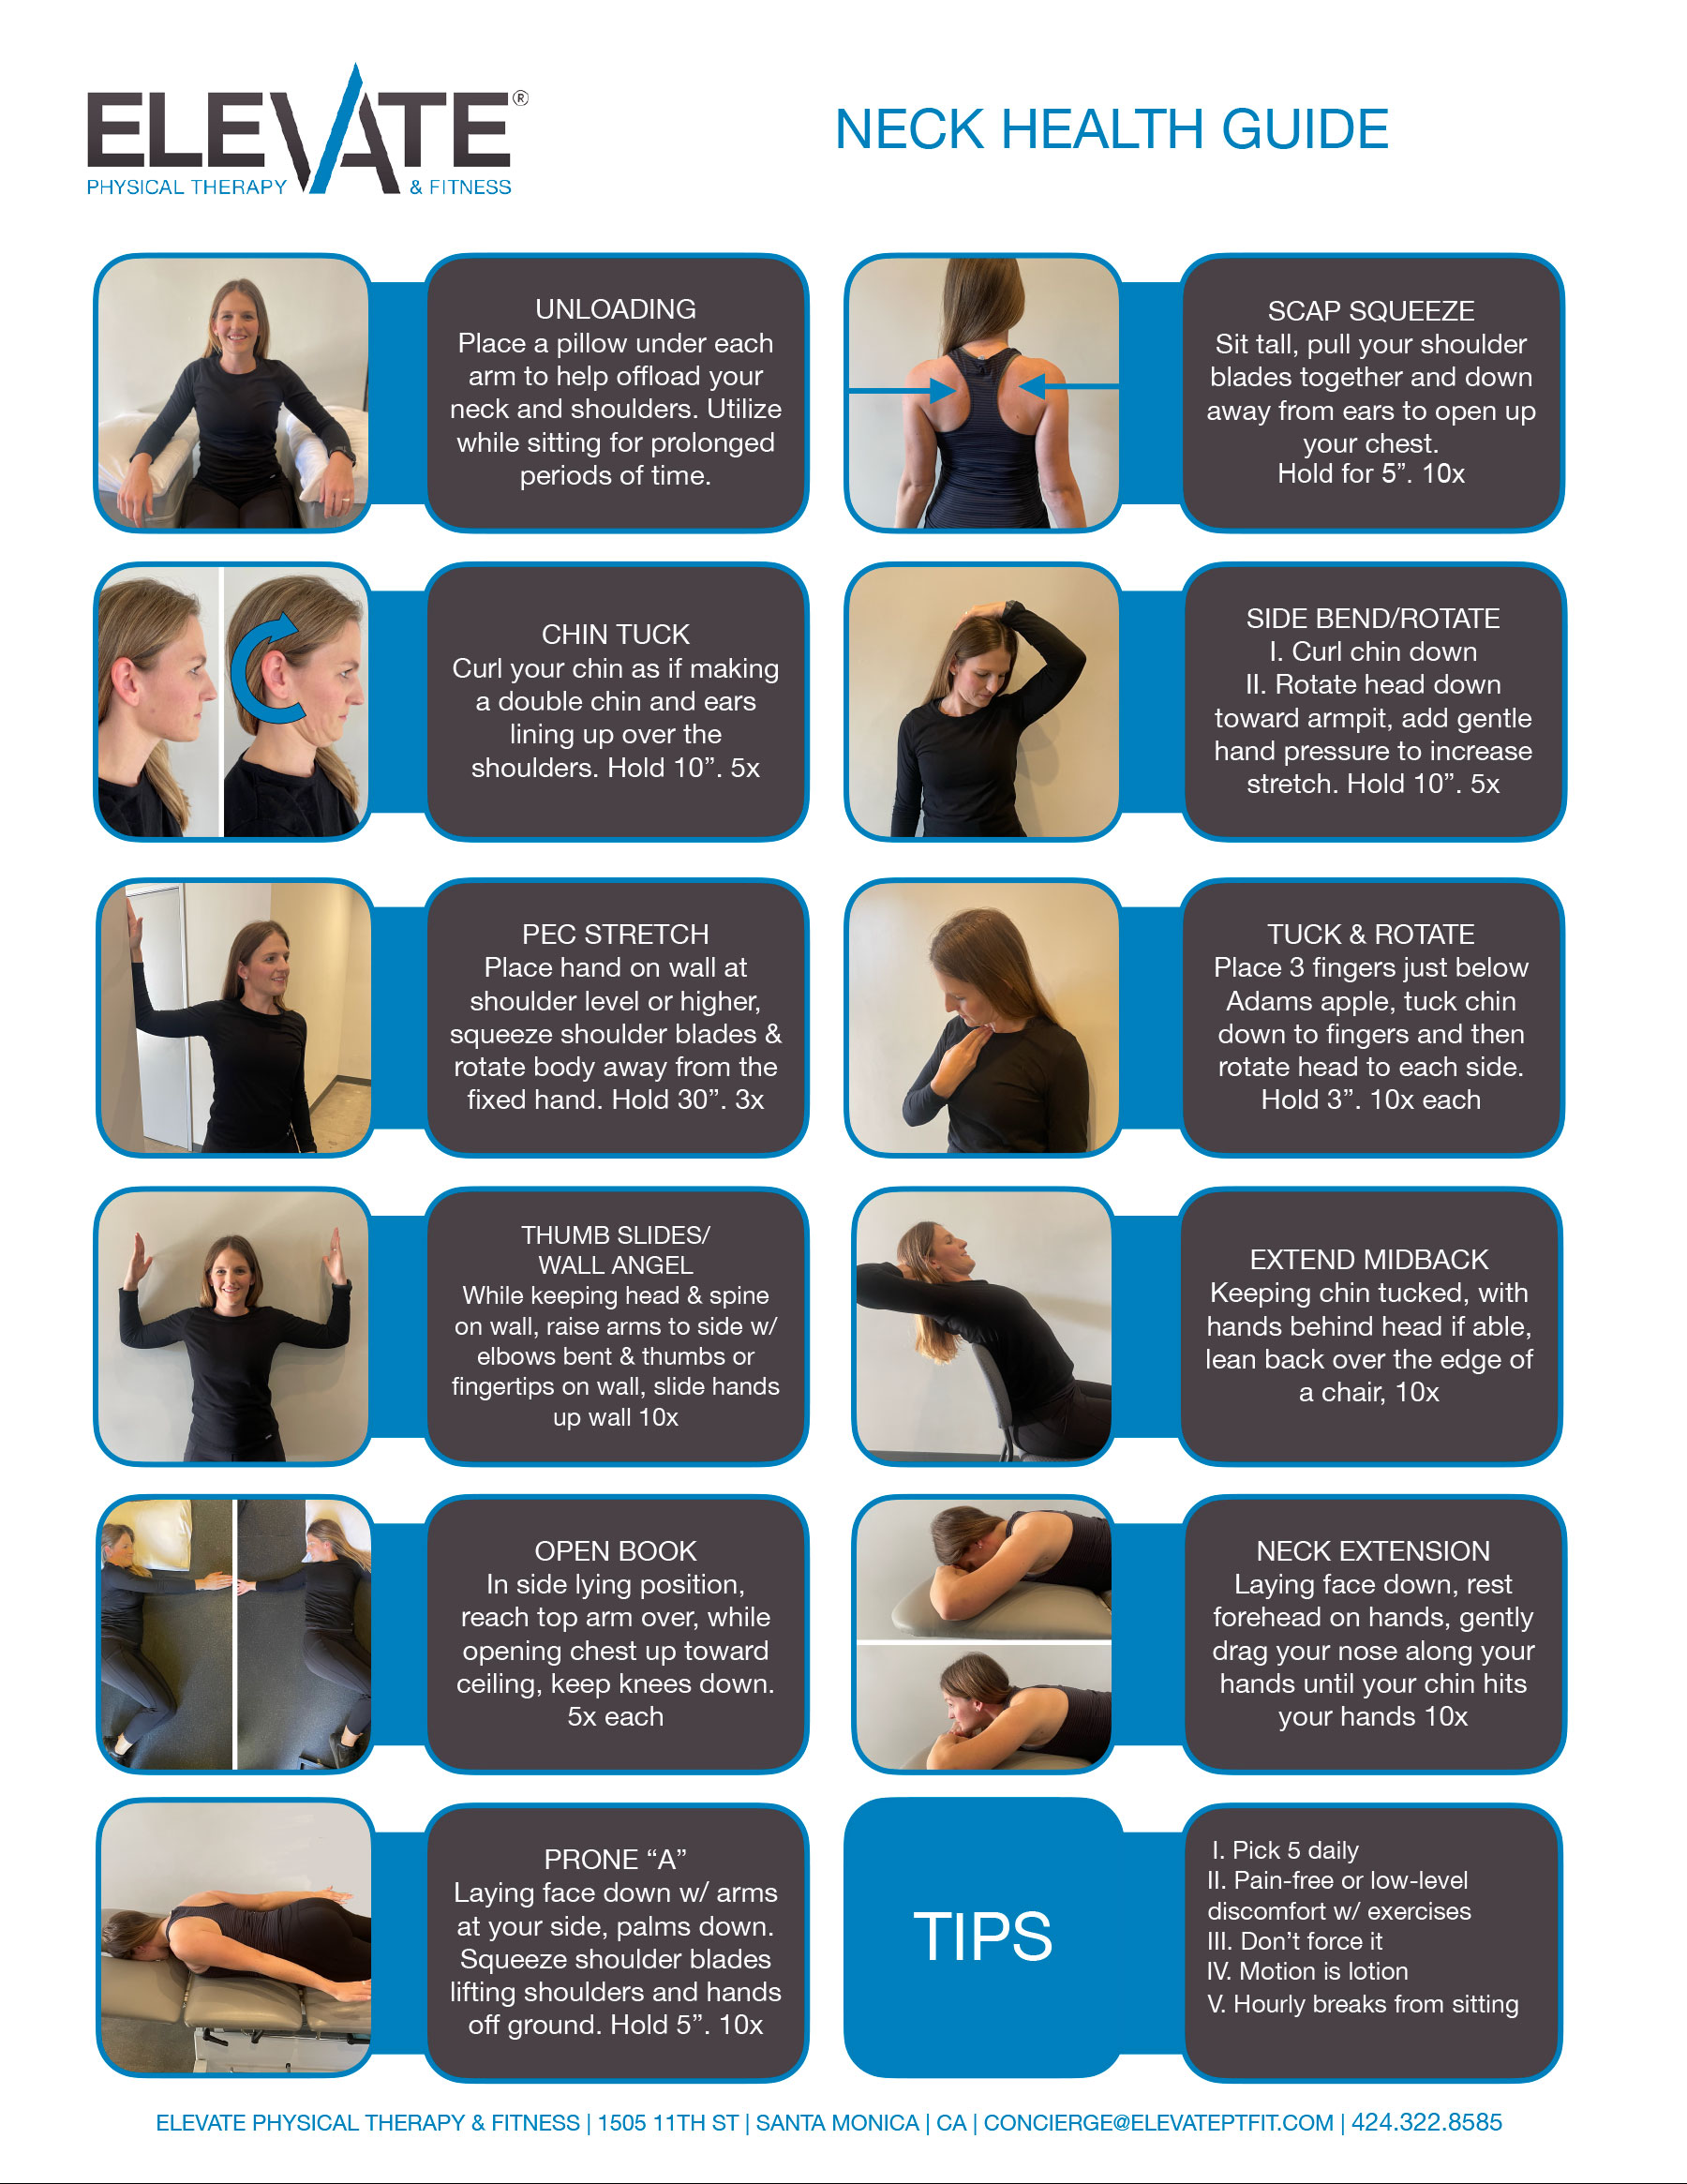 Stretches for your Arms, Neck, and Back!